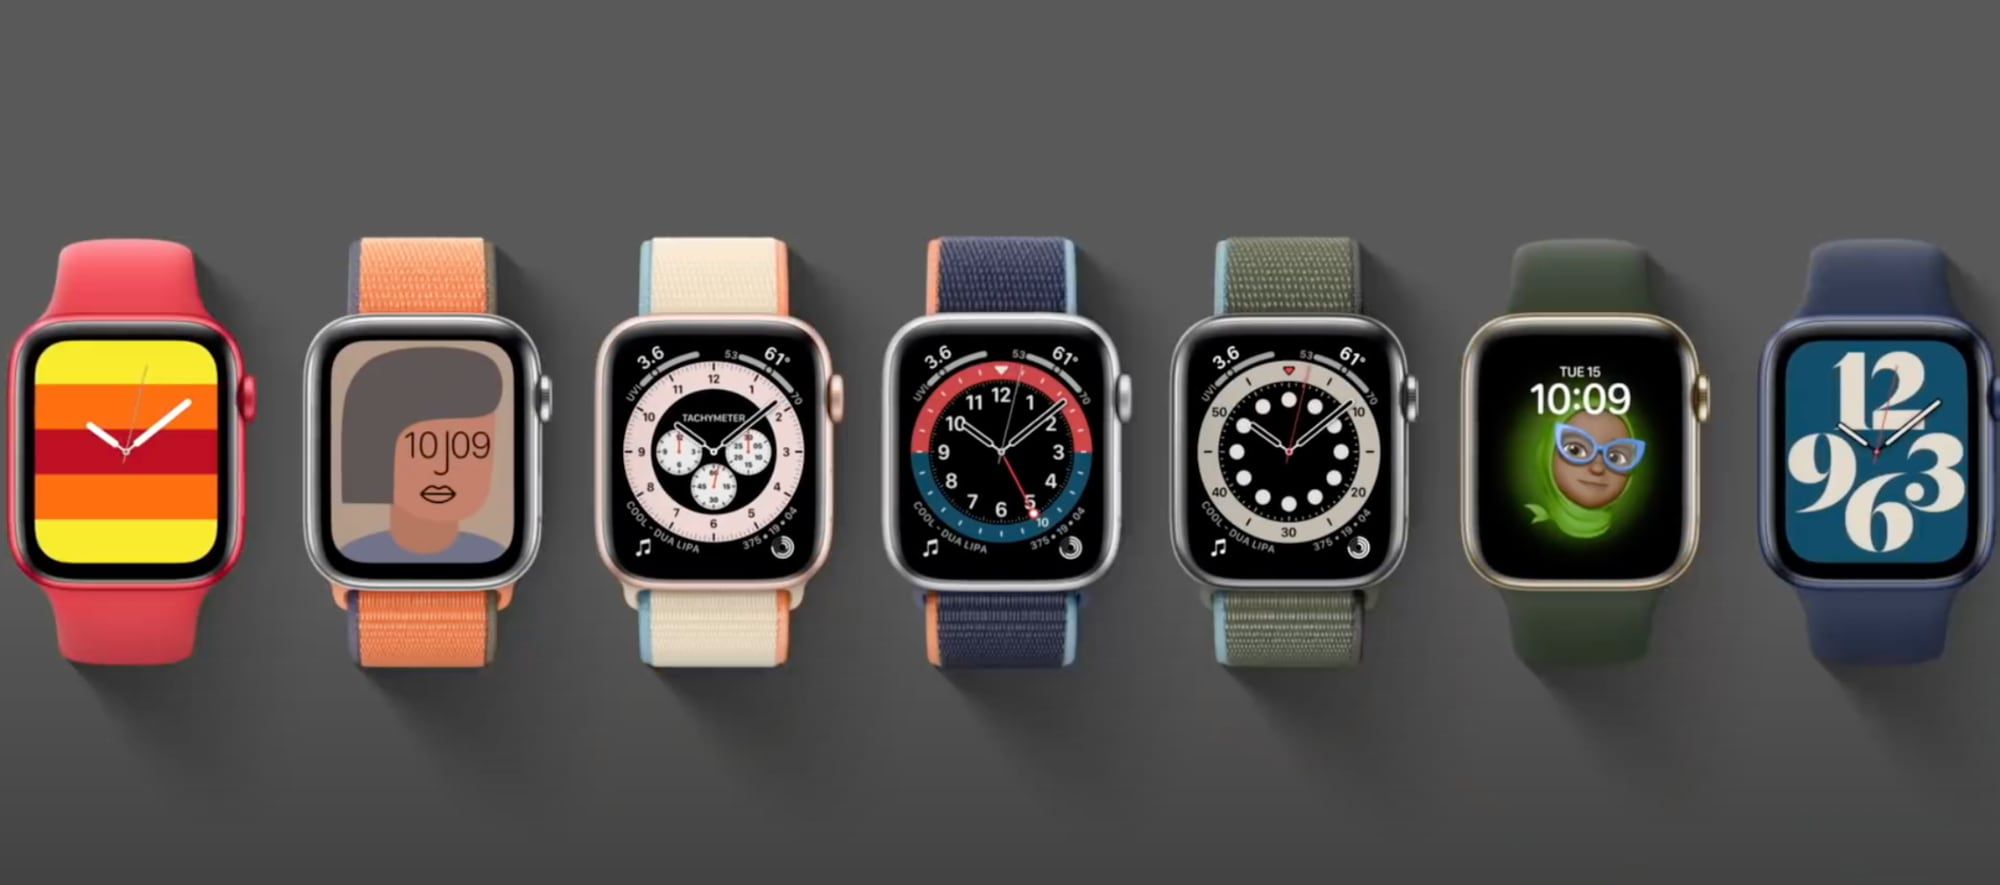 Here Are All of the New Apple Watch Faces Apple Announced Today MacRumors